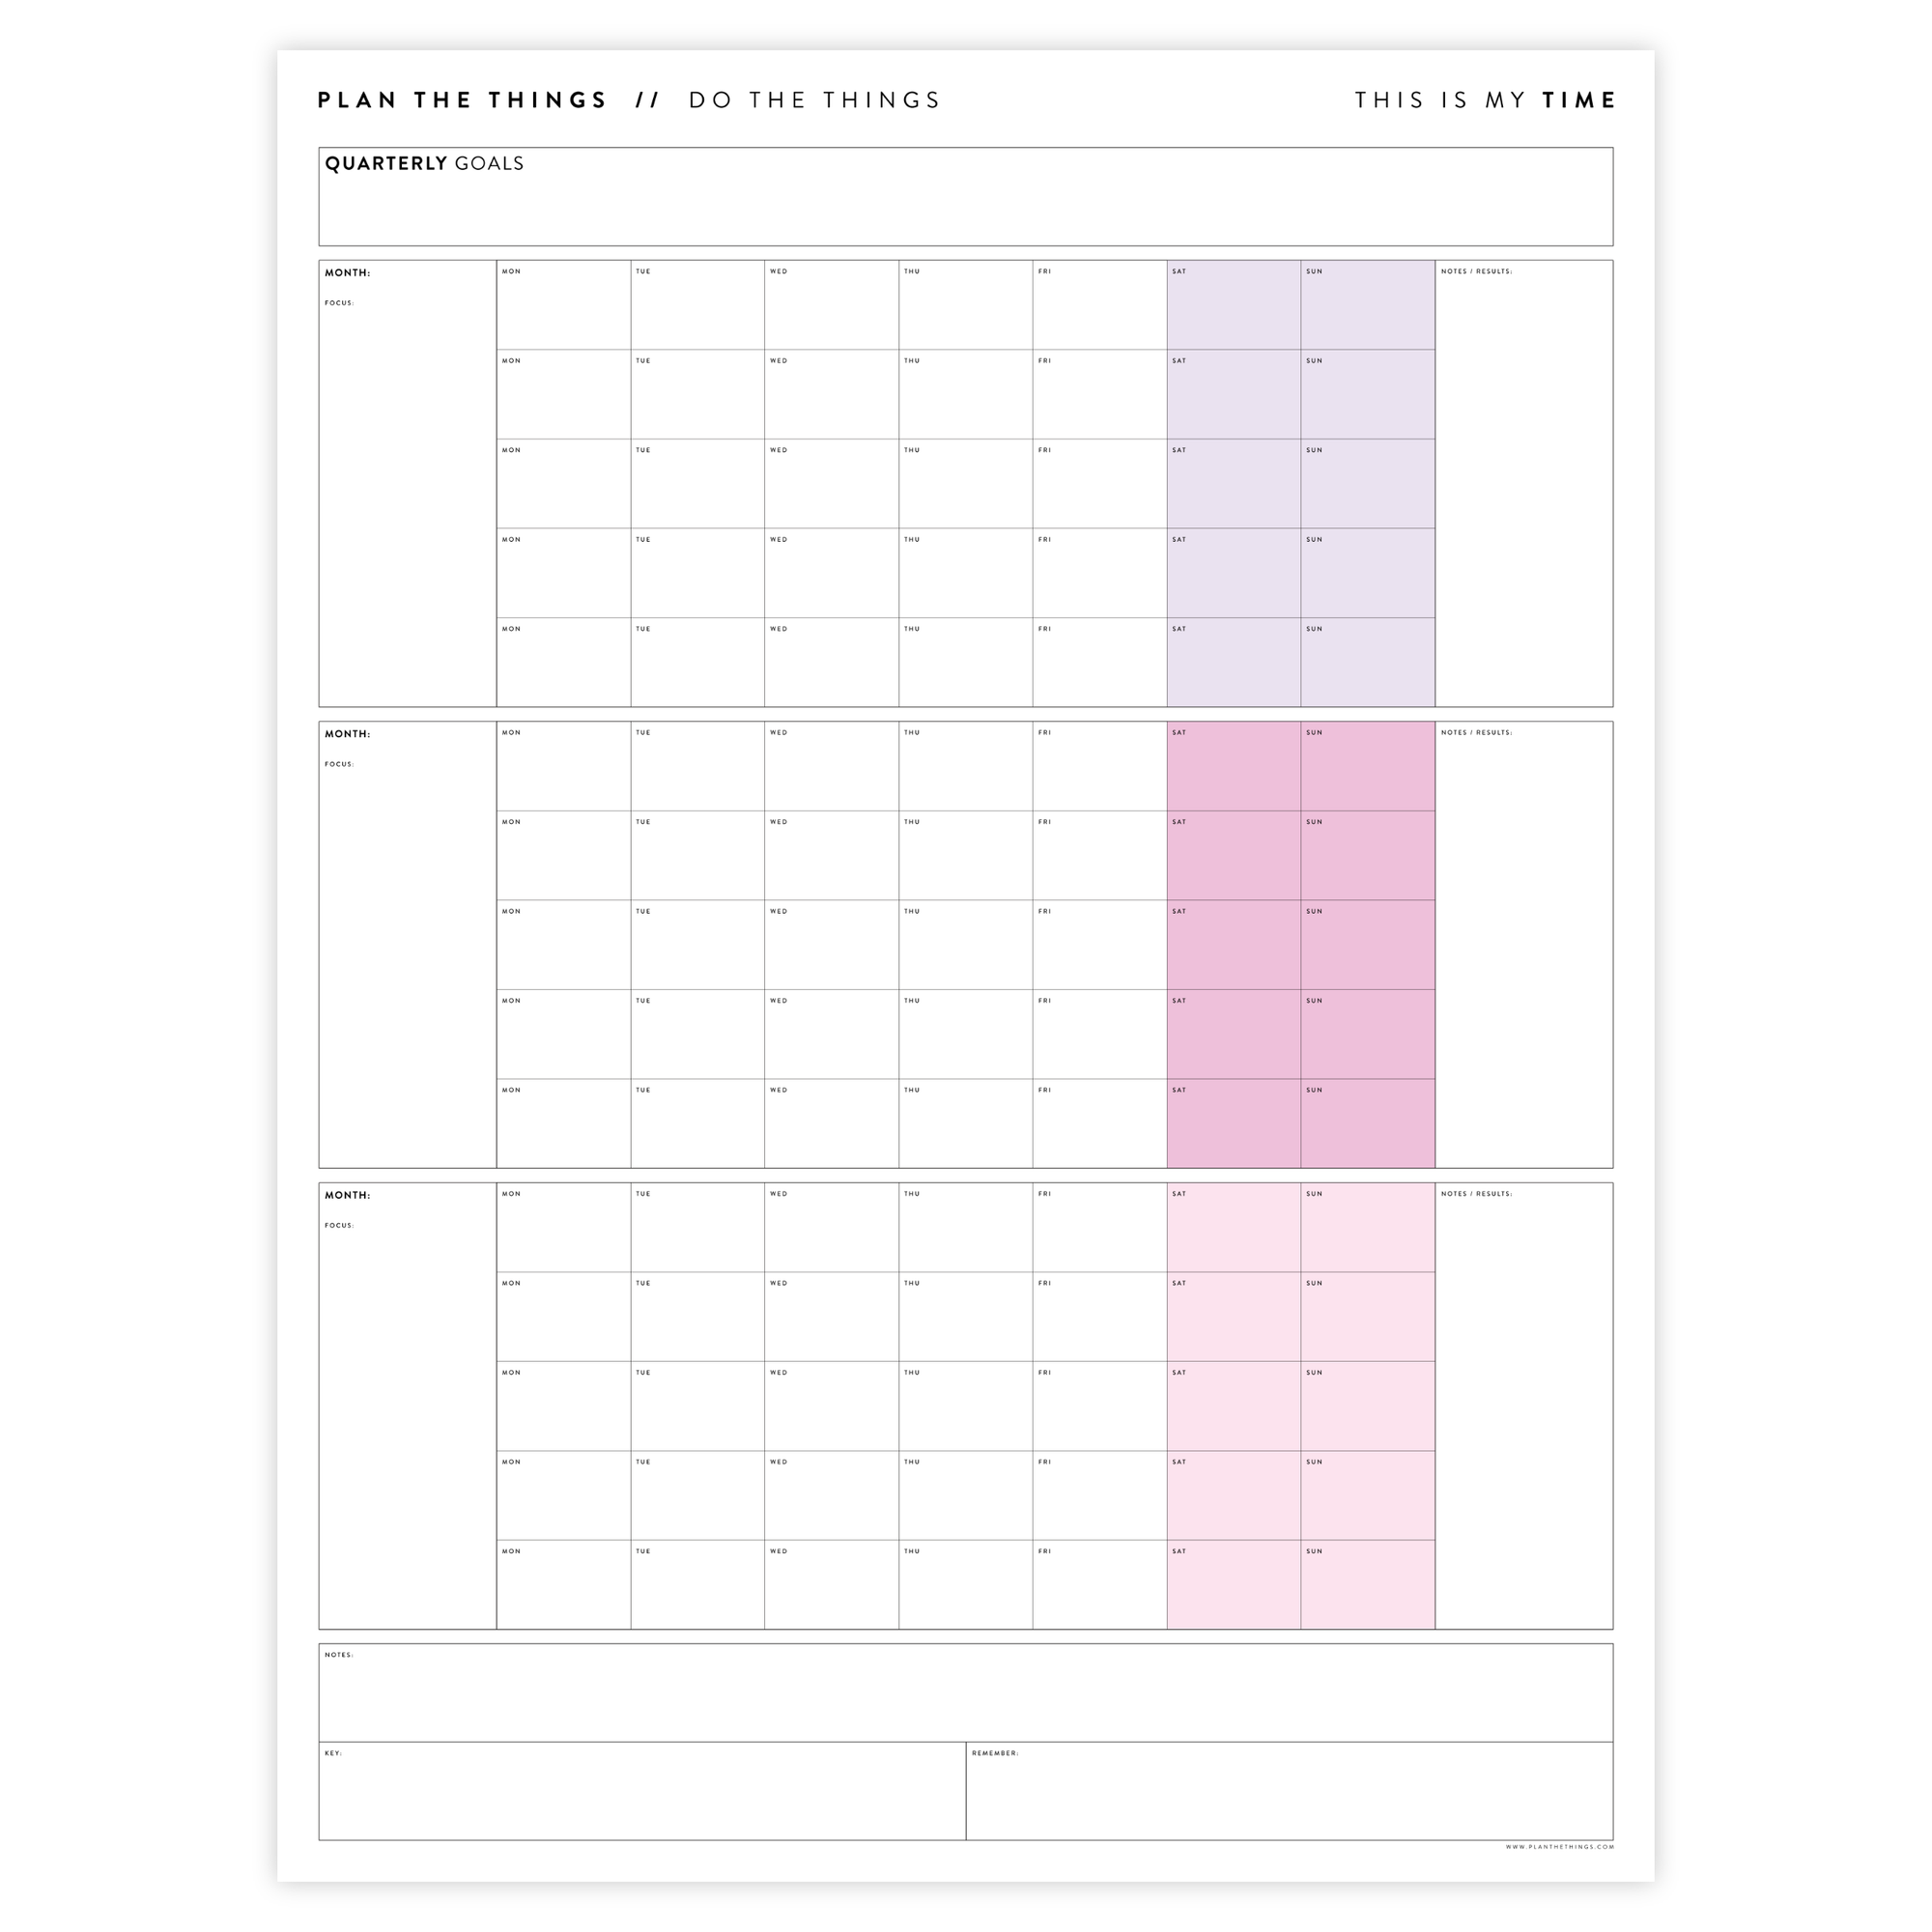 PRINTABLE UNDATED QUARTERLY WALL CALENDAR - MONDAY START - RAINBOW (4) WEEKENDS - INSTANT DOWNLOAD